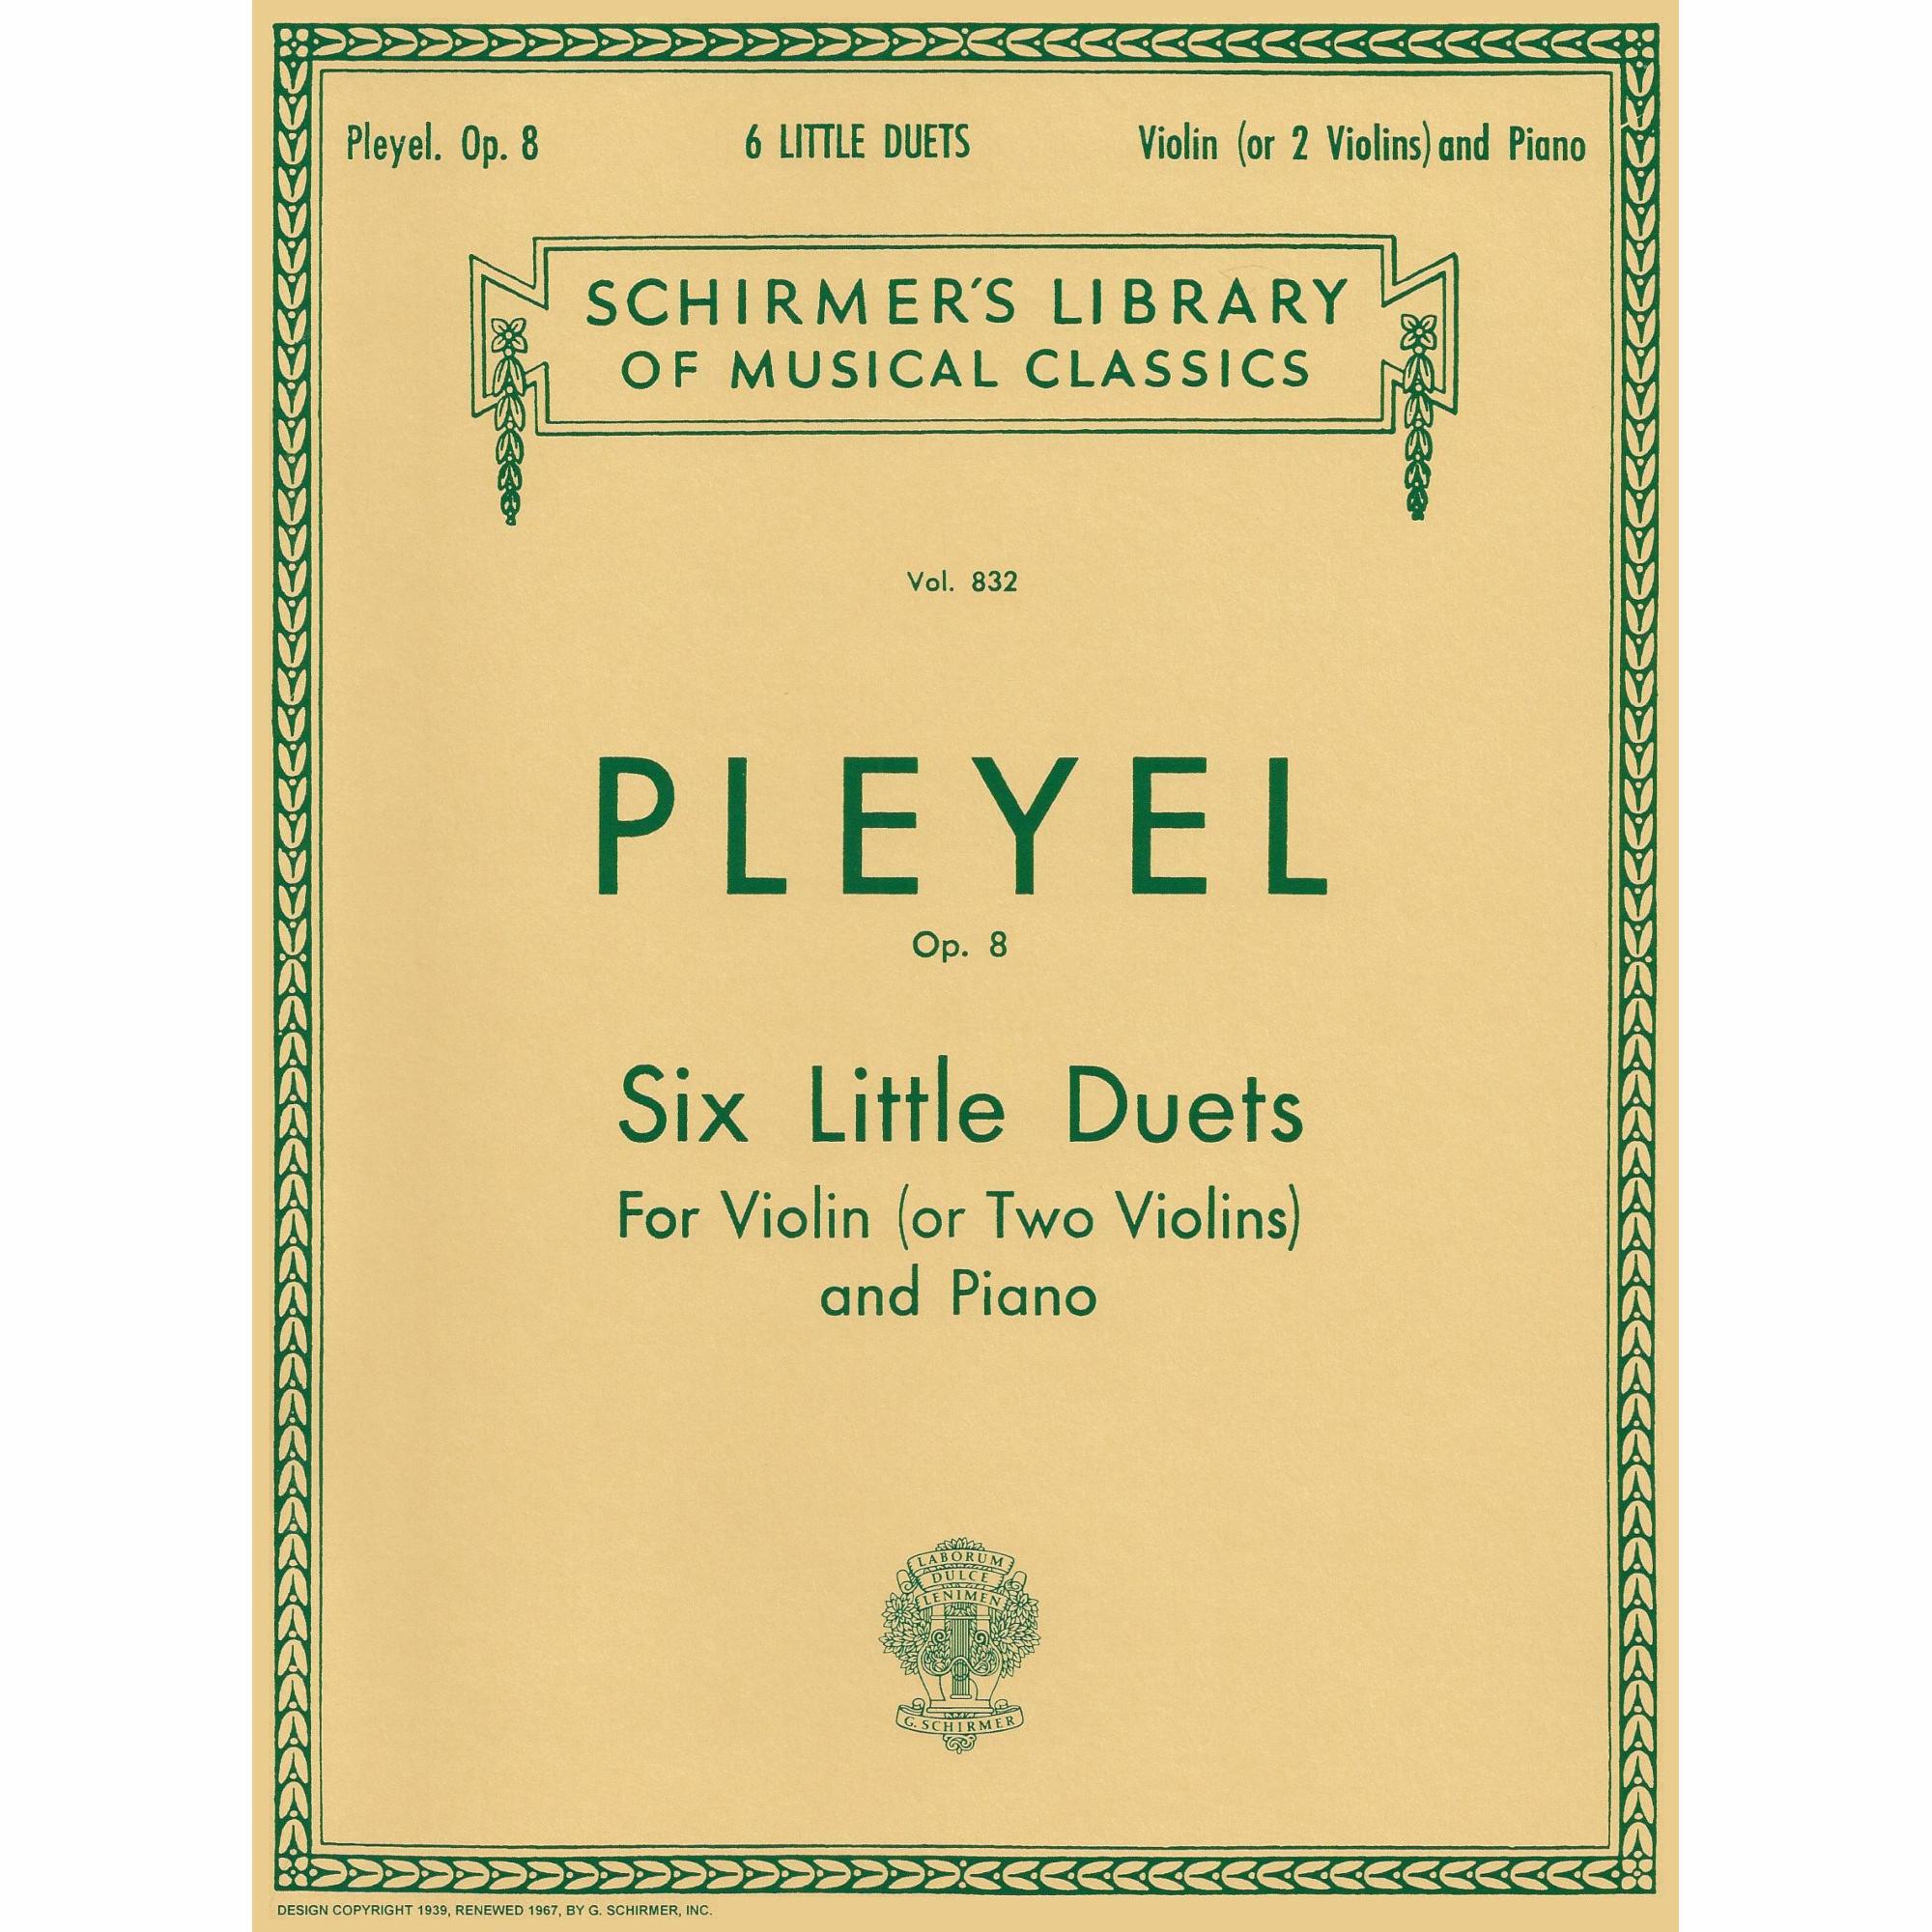 Pleyel -- Six Little Duets, Op. 8 for Violin (or Two Violins) and Piano